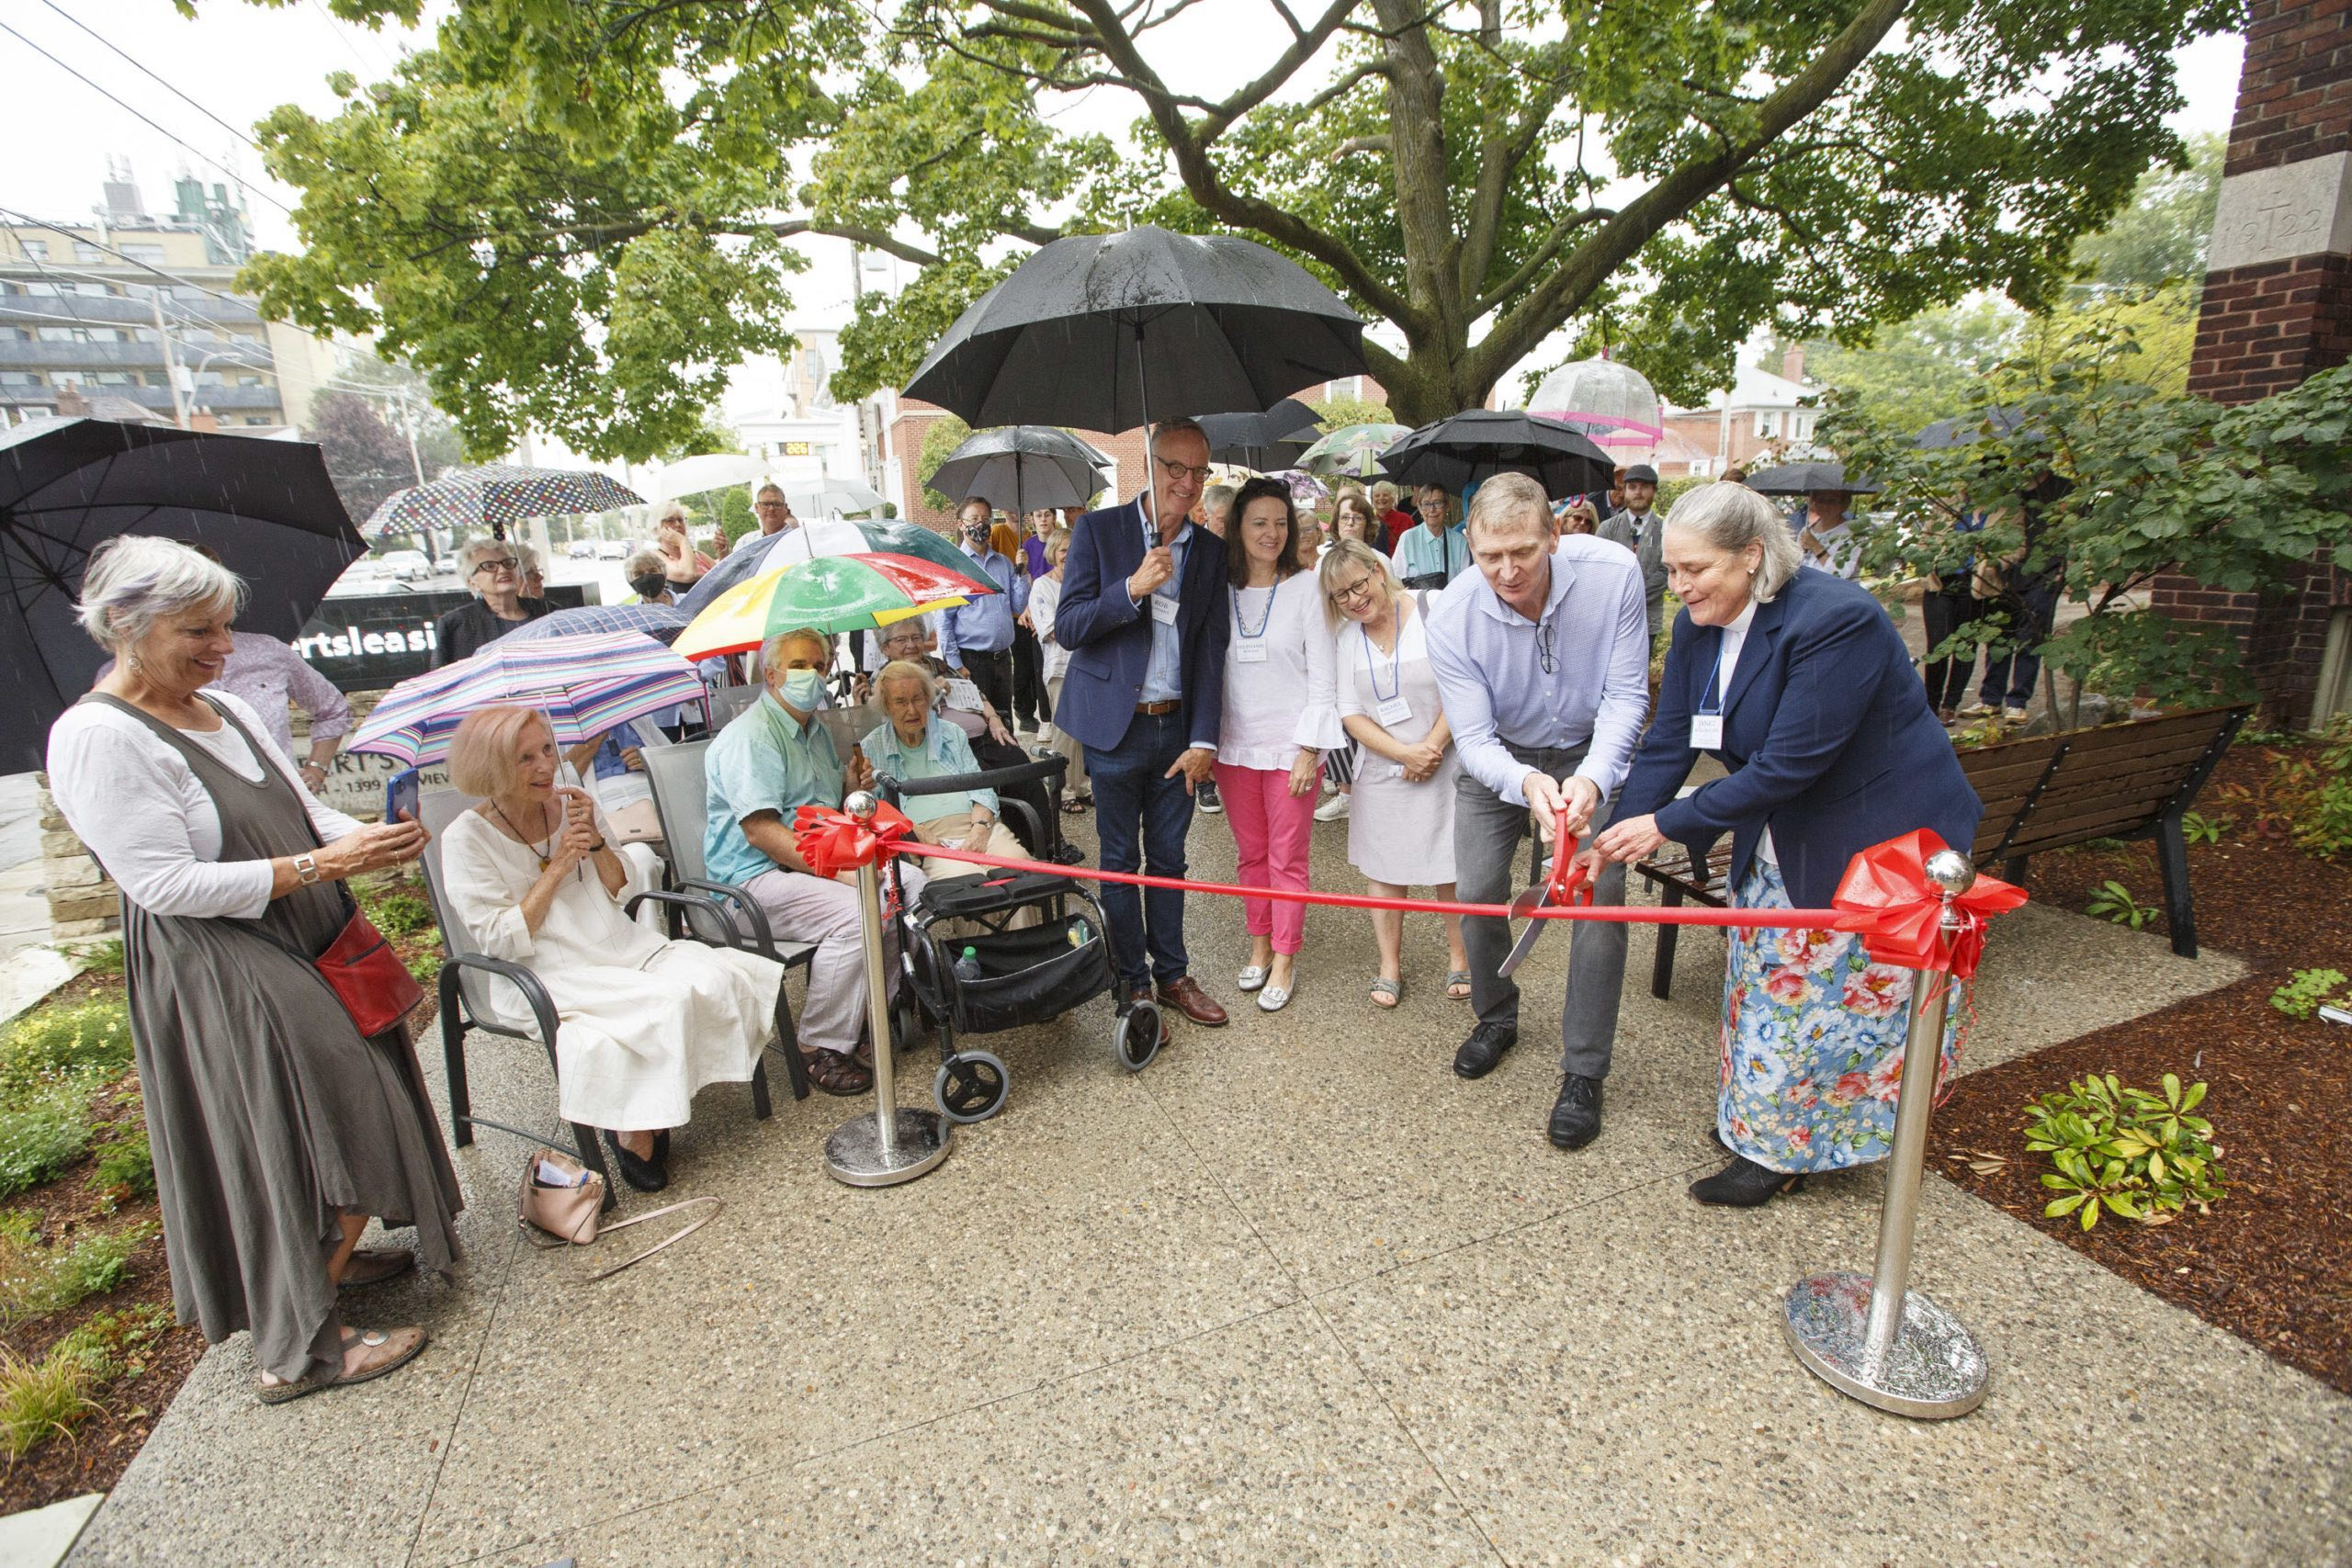 A group of people under umbrellas stand behind a red ribbon being cut with large scissors